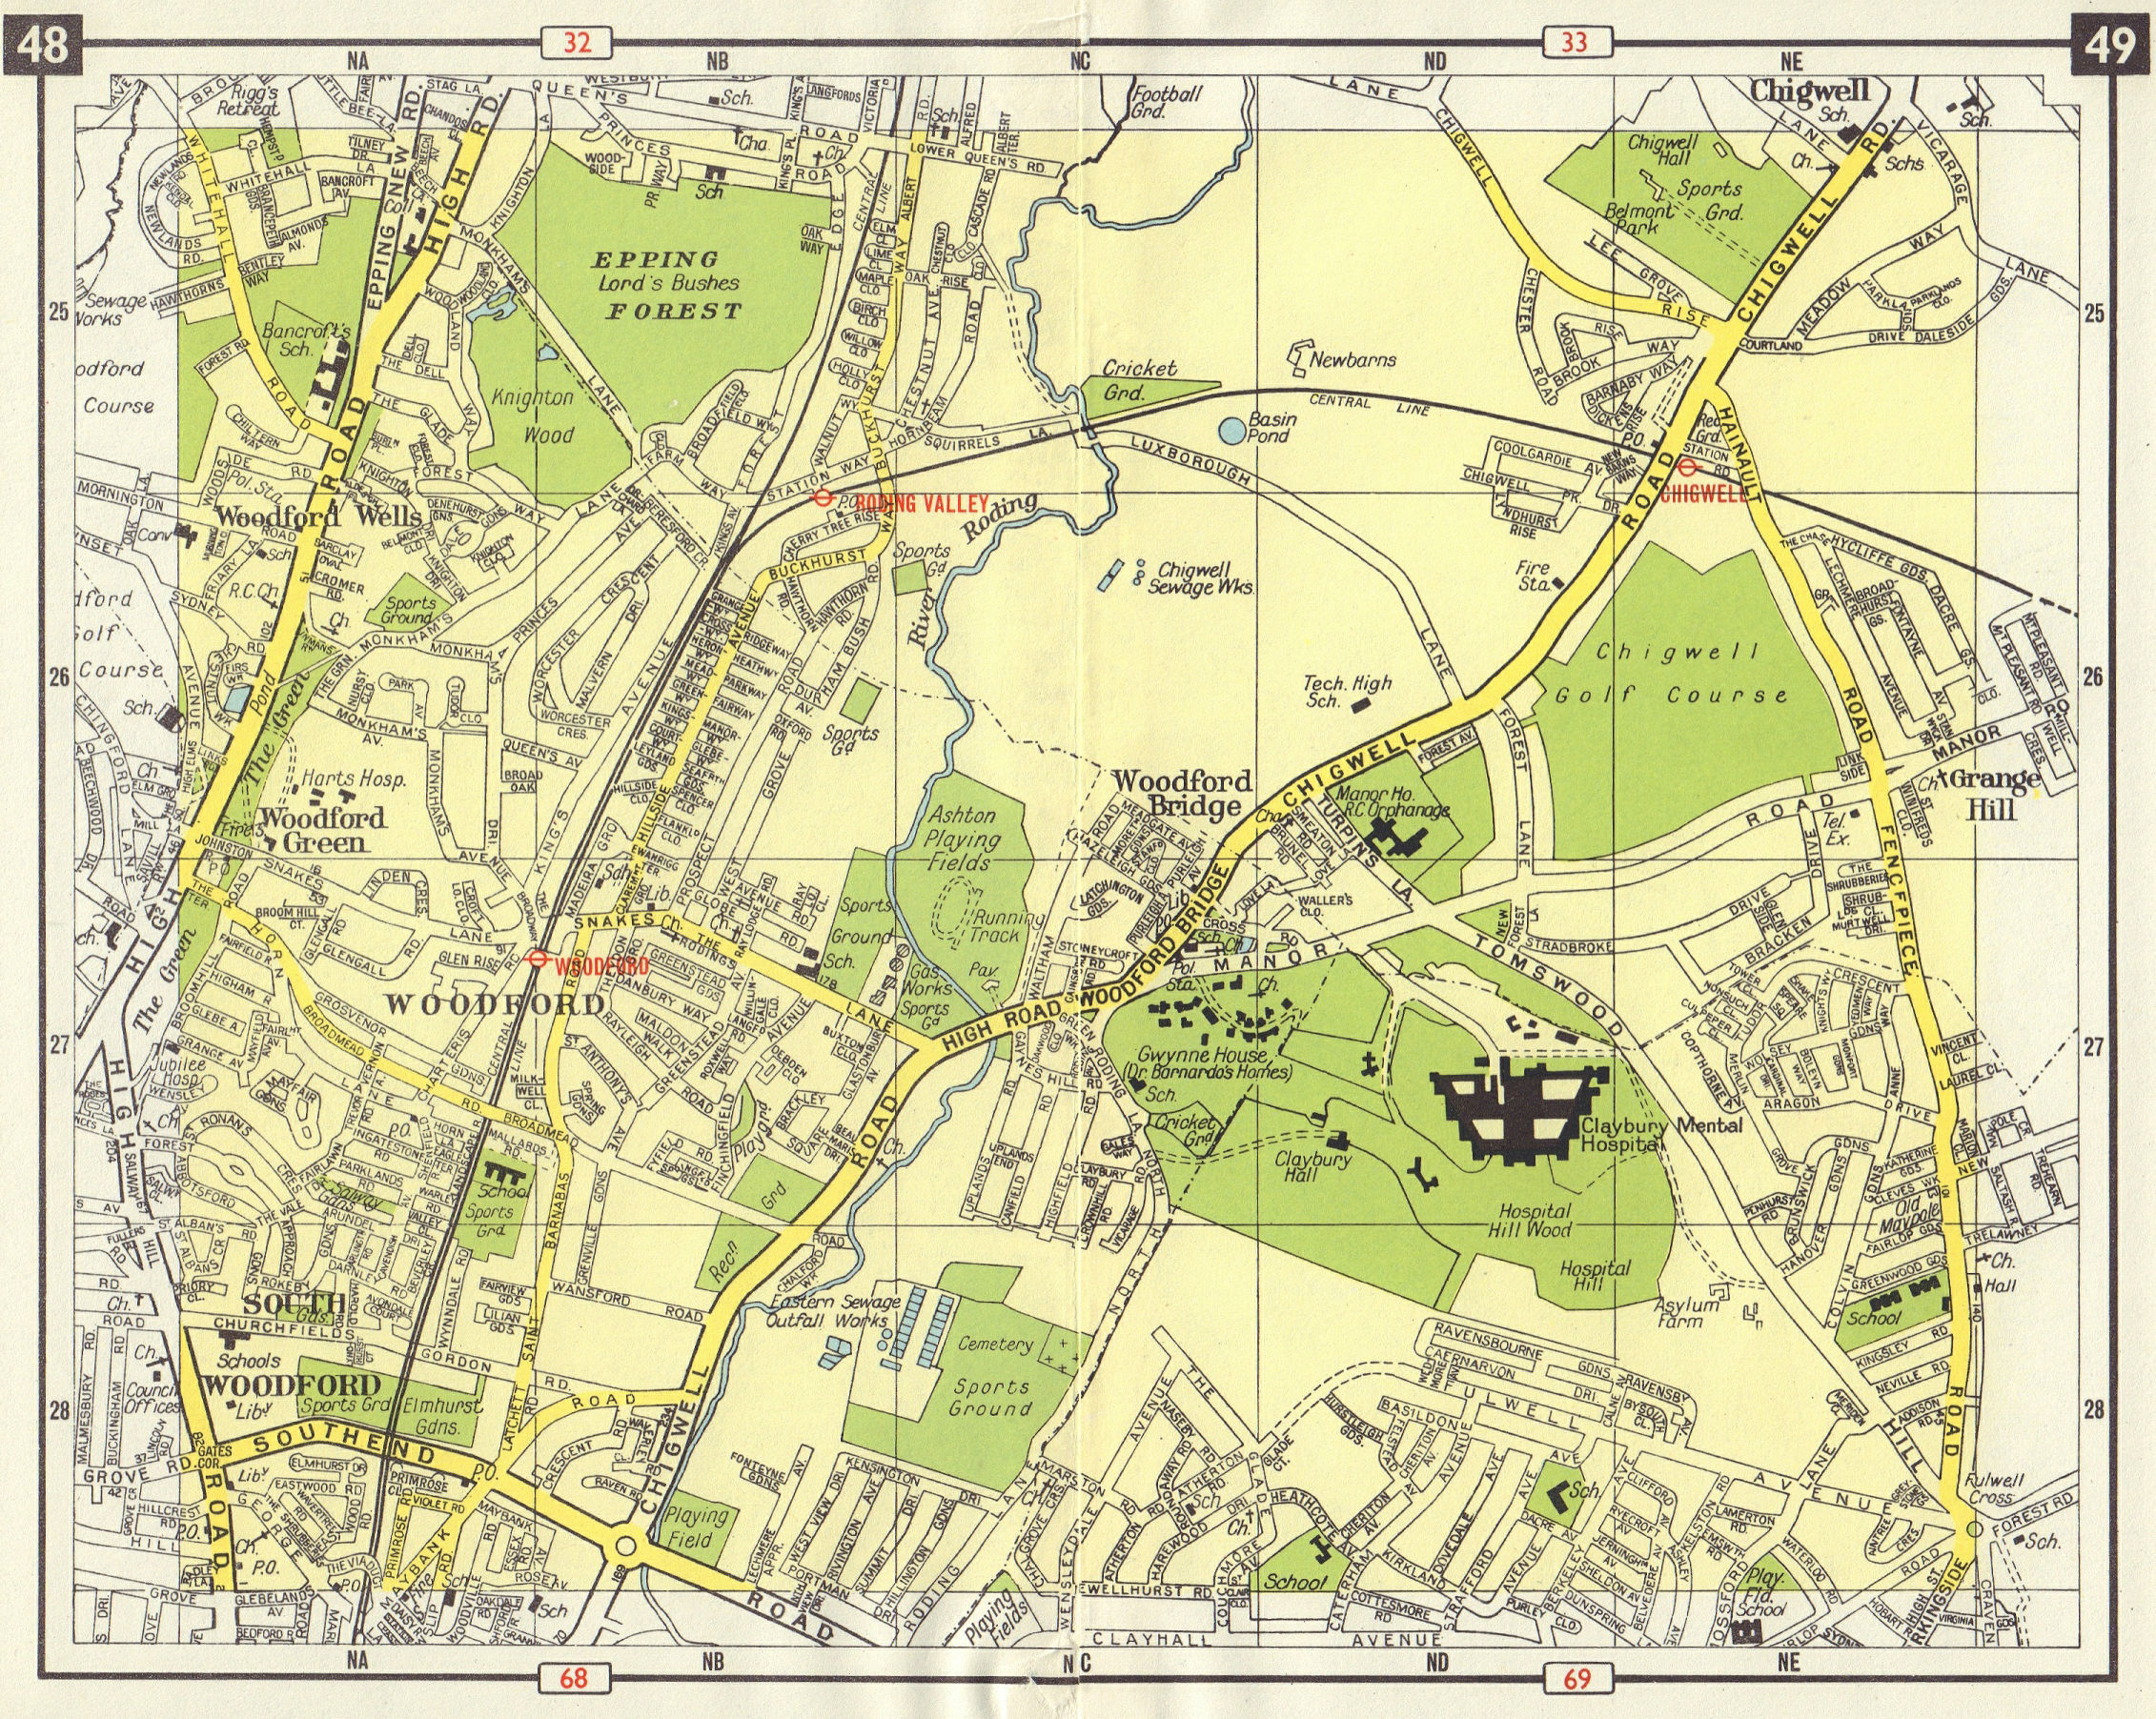 NE LONDON South Woodford Green Chigwell Grange Hill Roding Valley 1965 old map